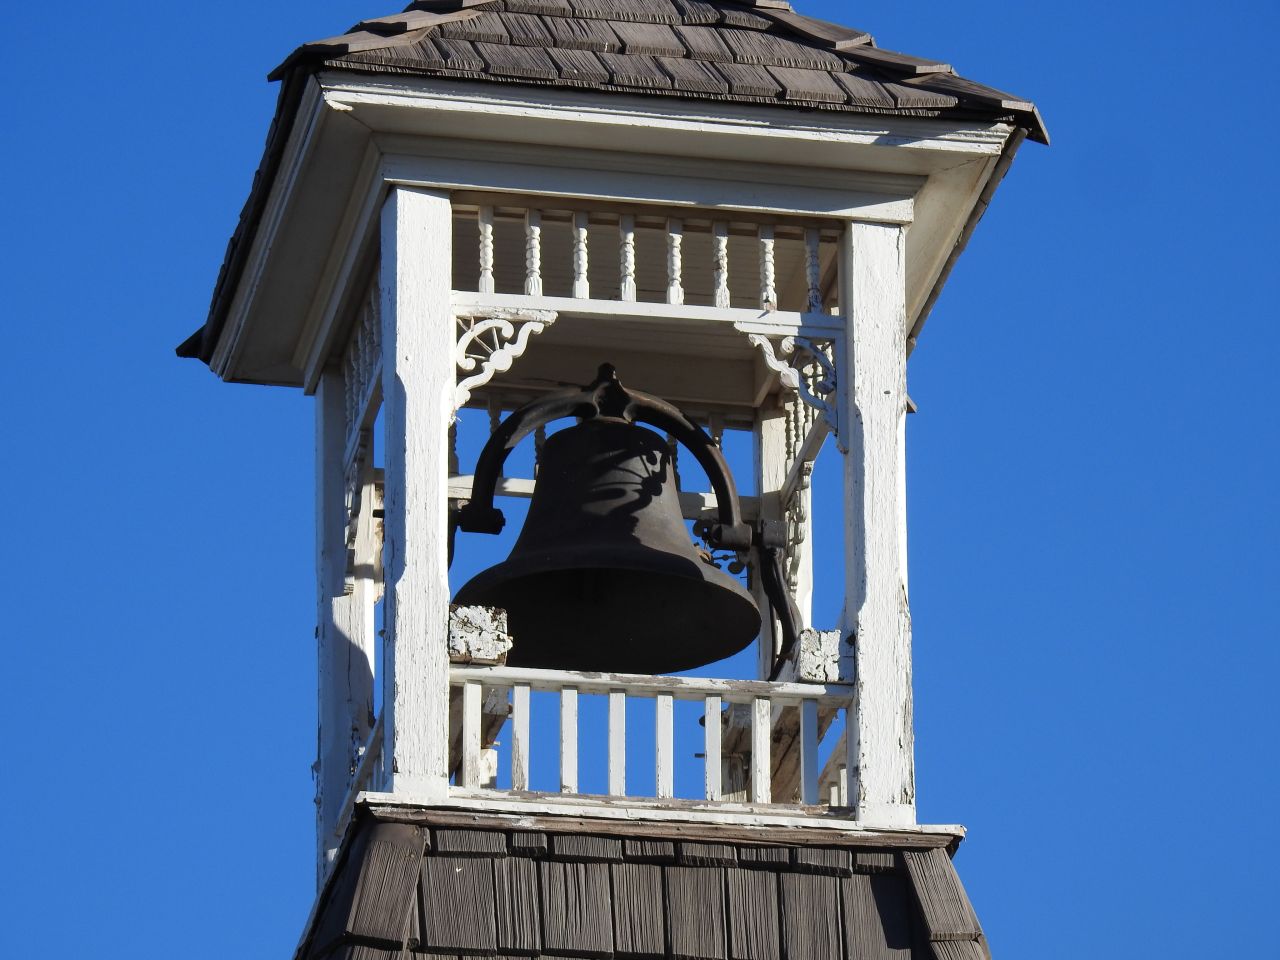 Bells of the ball: New electronic bell chimes system is set for  installation in the historic bell tower at First United Methodist of  Oklahom City